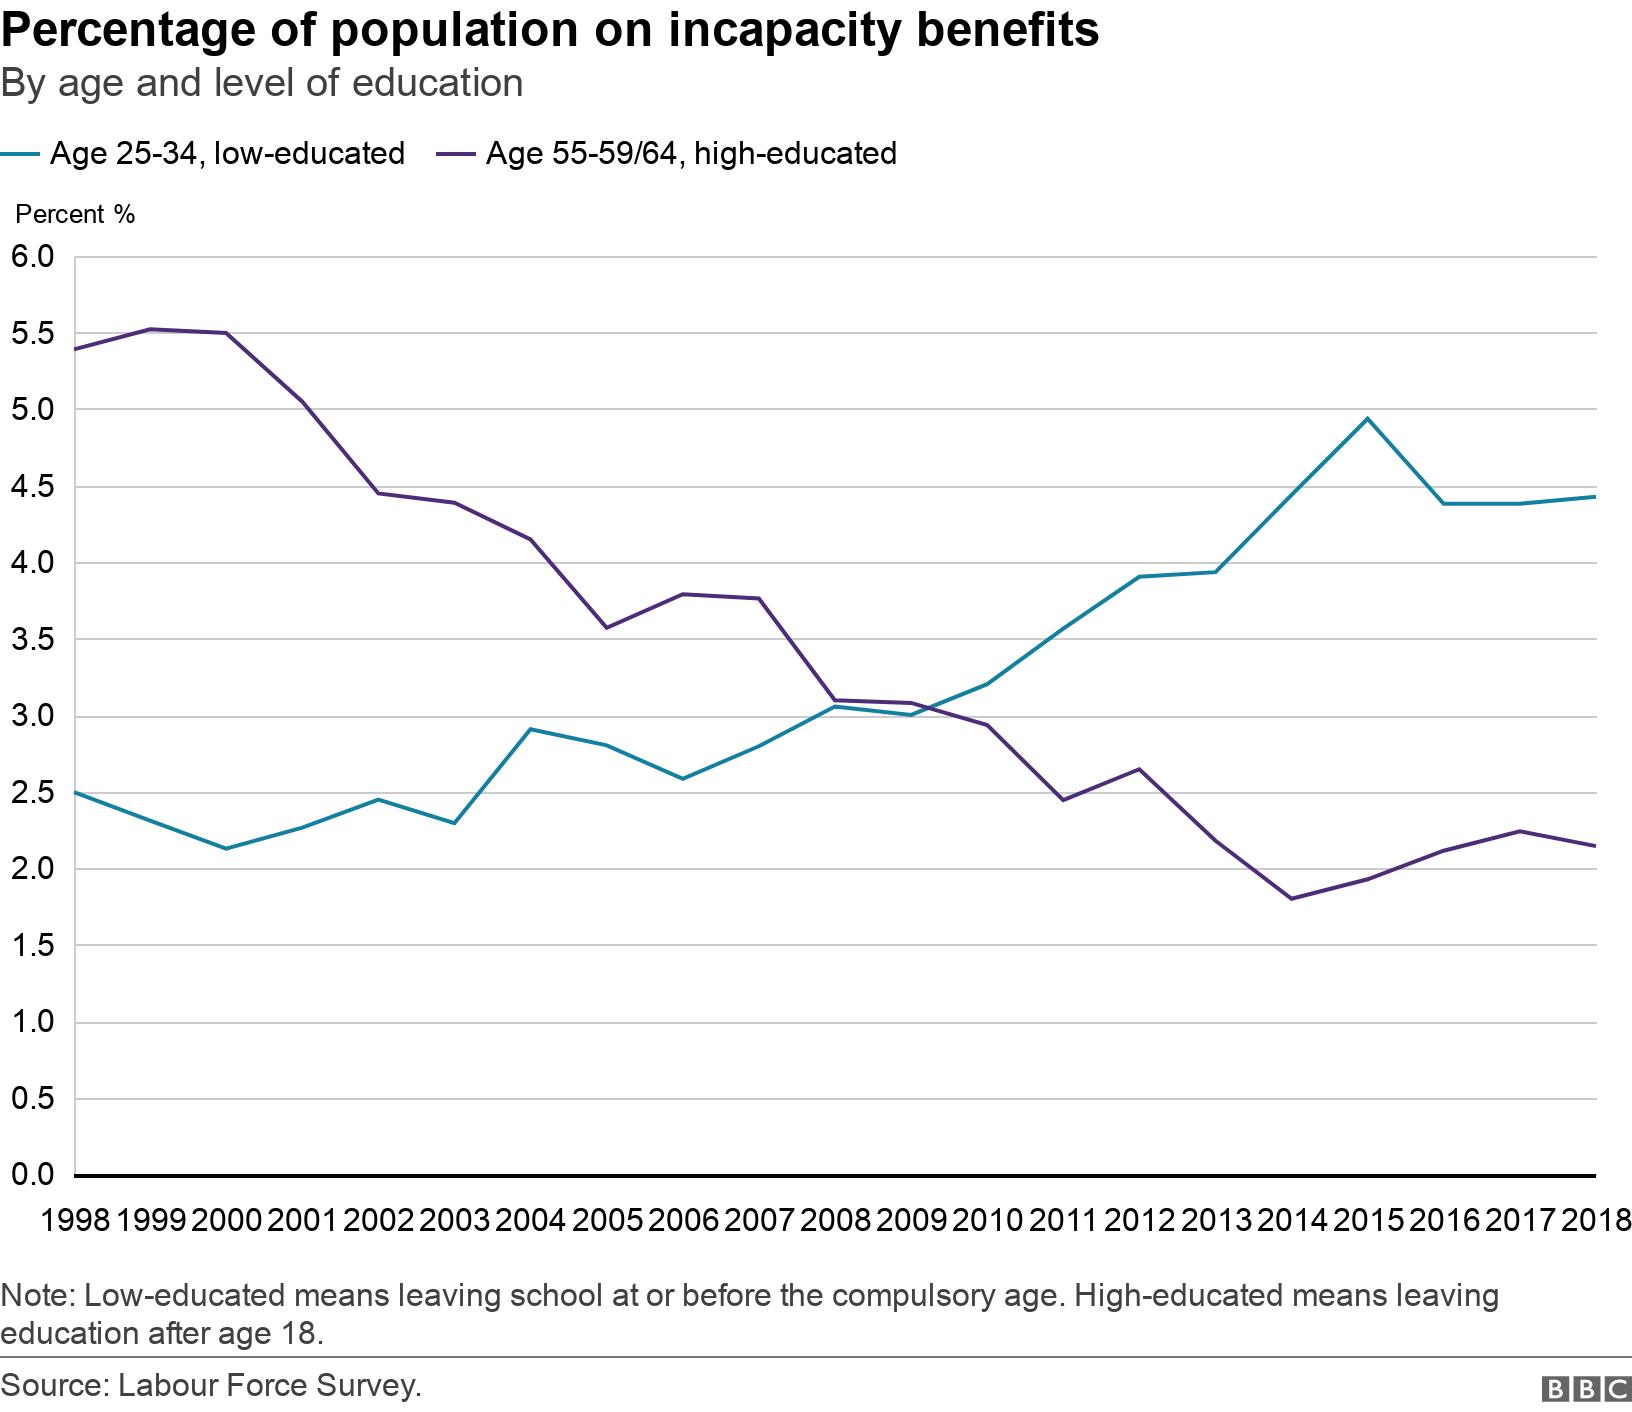 Percentage of population on incapacity benefits. By age and level of education.  Note: Low-educated means leaving school at or before the compulsory age. High-educated means leaving education after age 18..